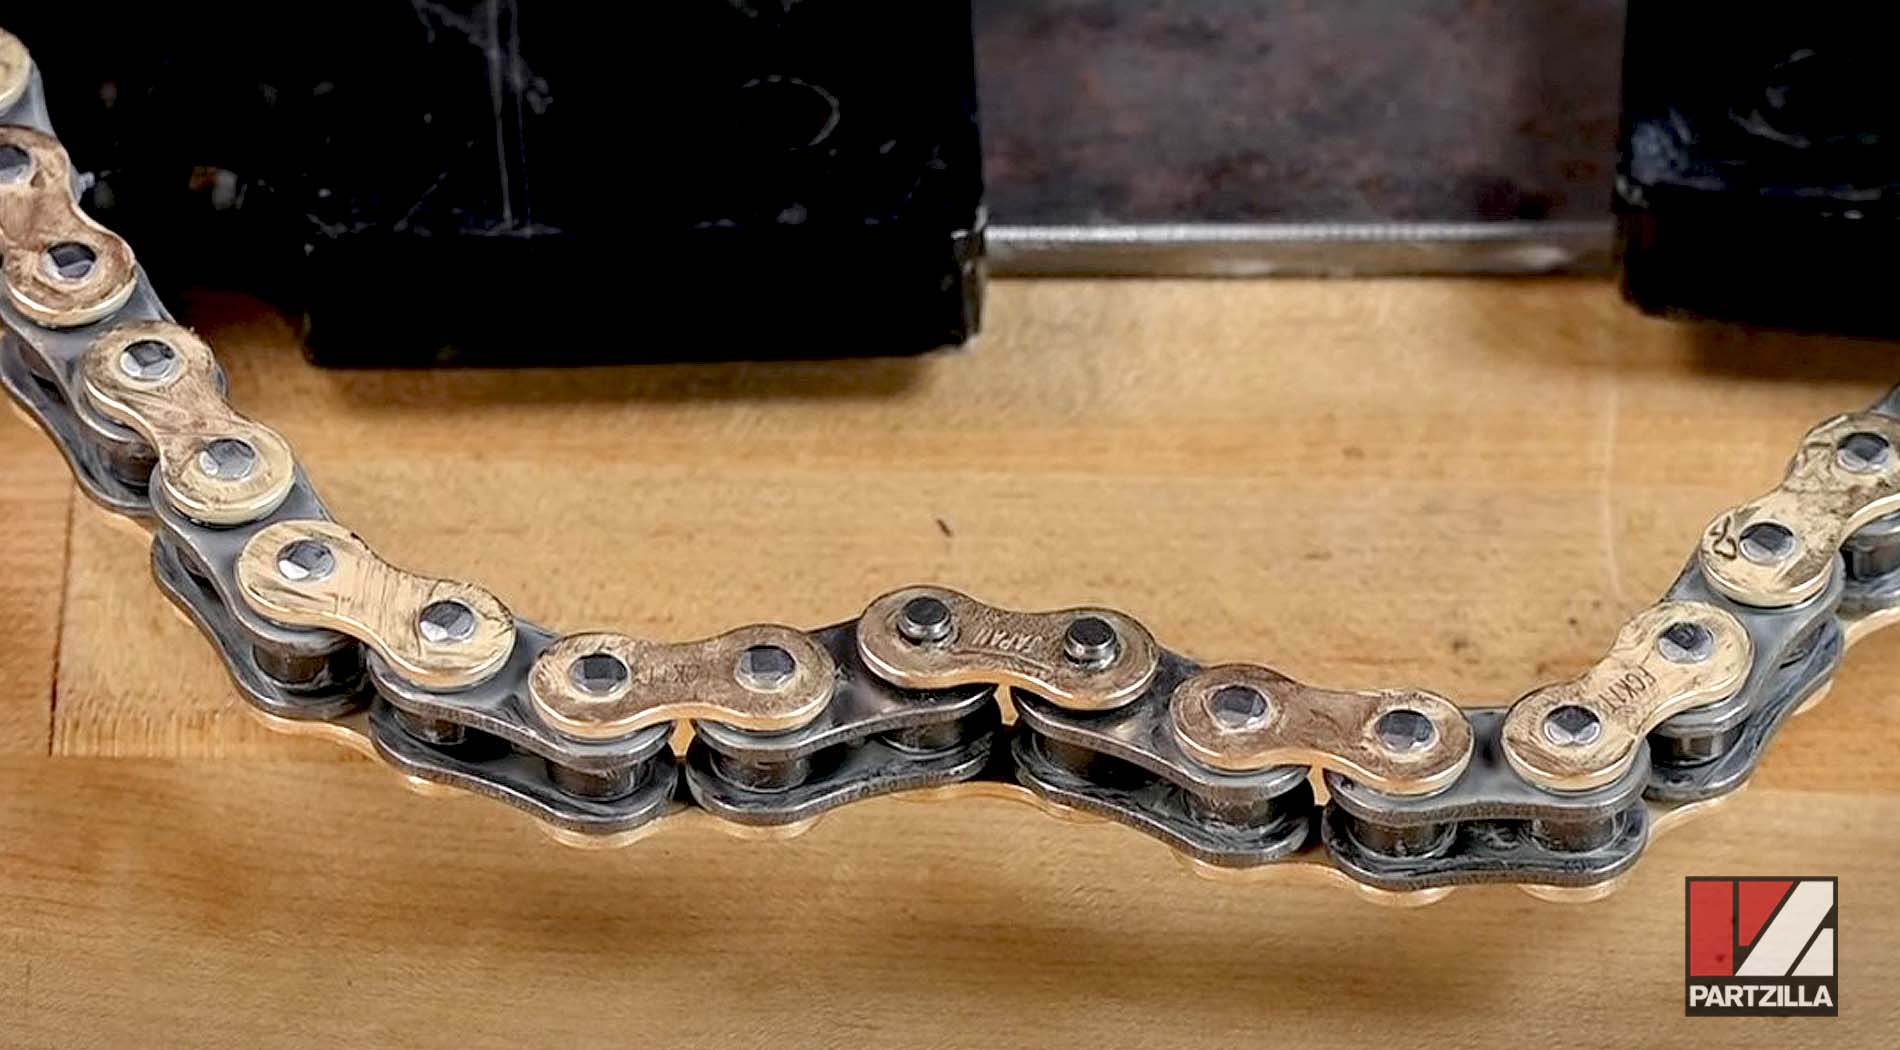 How to make motorcycle chain